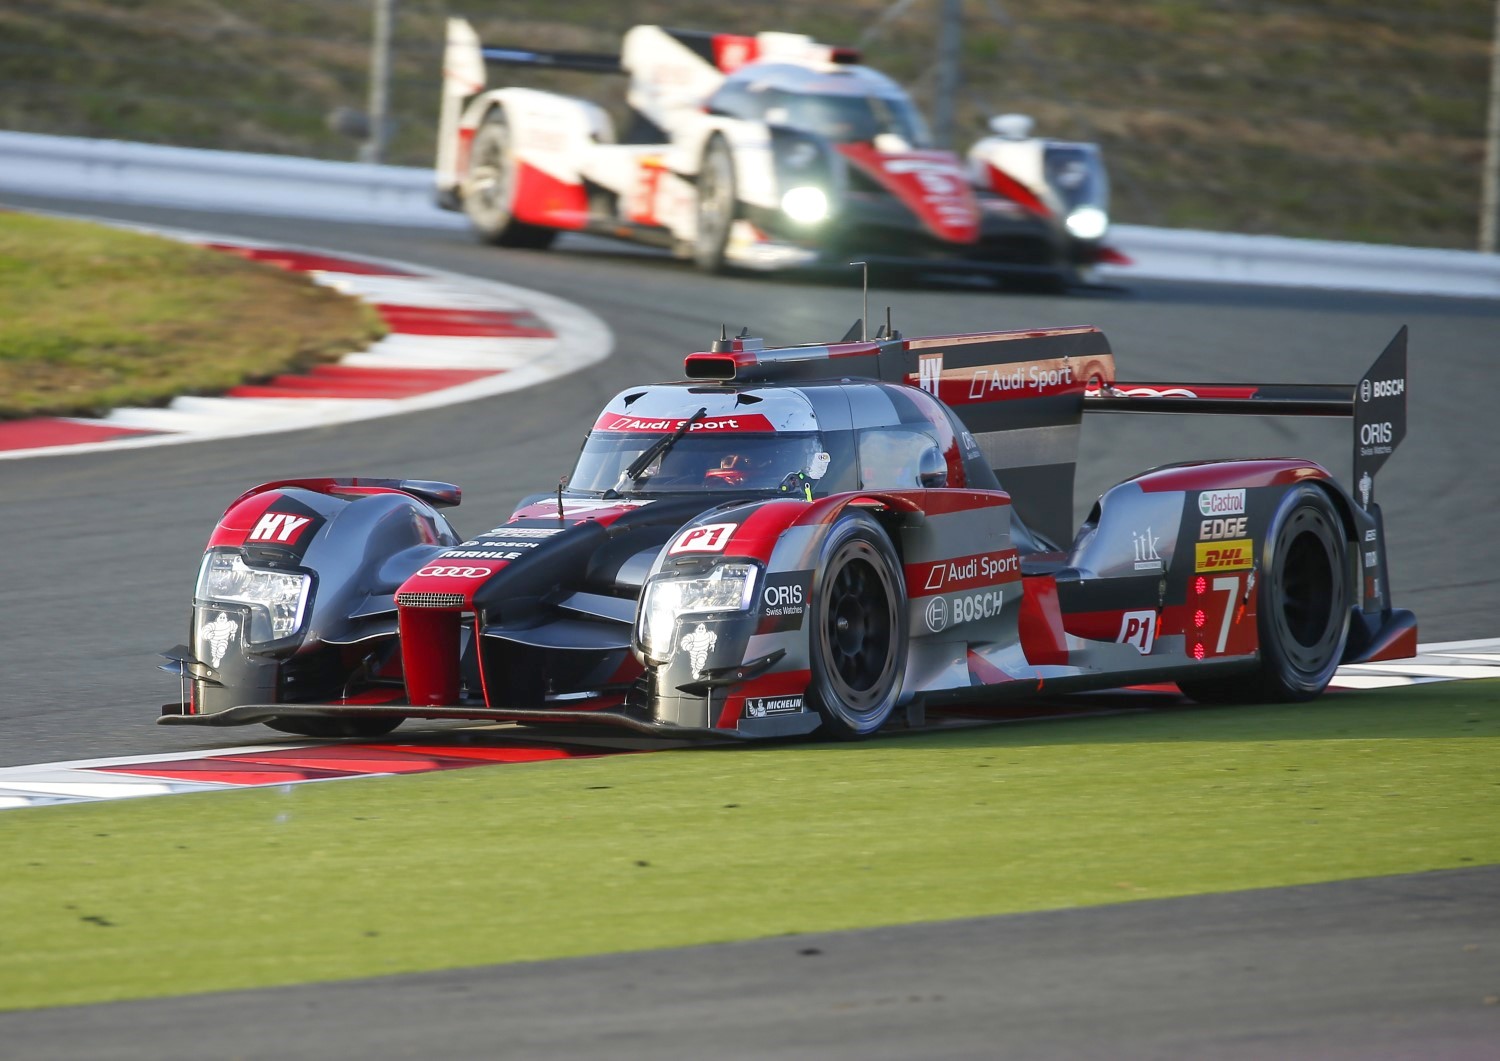 Audi is out of sportscars so they could do an F1 engine. Will they propose their air polluting diesel engines that they ran (cough-cough) in WEC for years?